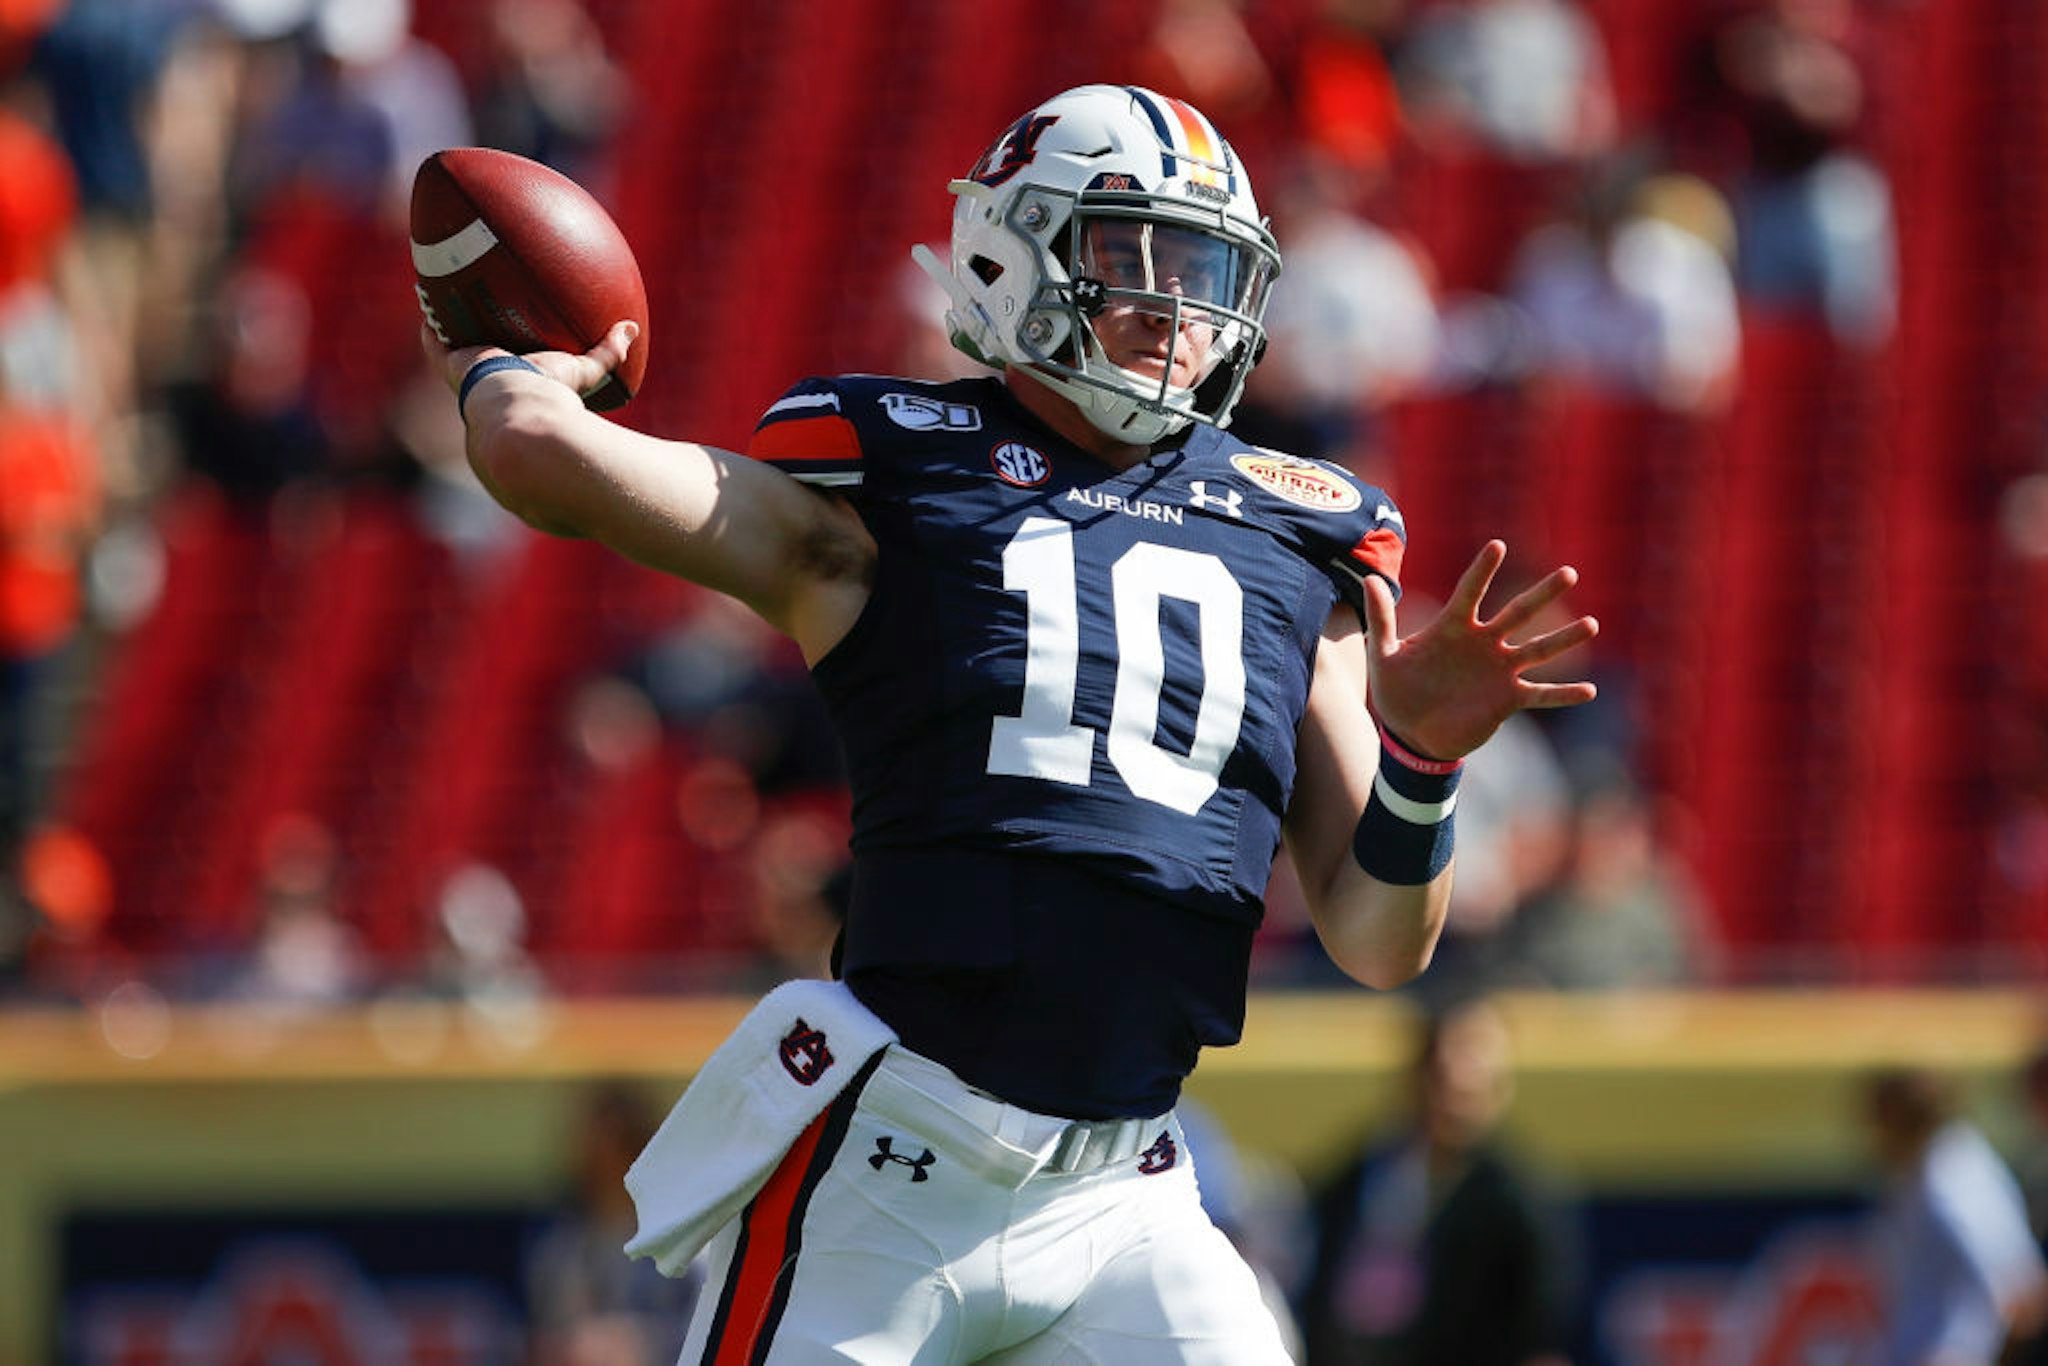 TAMPA, FL - JANUARY 01: Auburn Tigers quarterback Bo Nix (10) during the Outback Bowl between the Auburn Tigers and Minnesota Golden Gophers on January 01, 2020 at Raymond James Stadium in Tampa, FL. (Photo by Mark LoMoglio/Icon Sportswire via Getty Images)